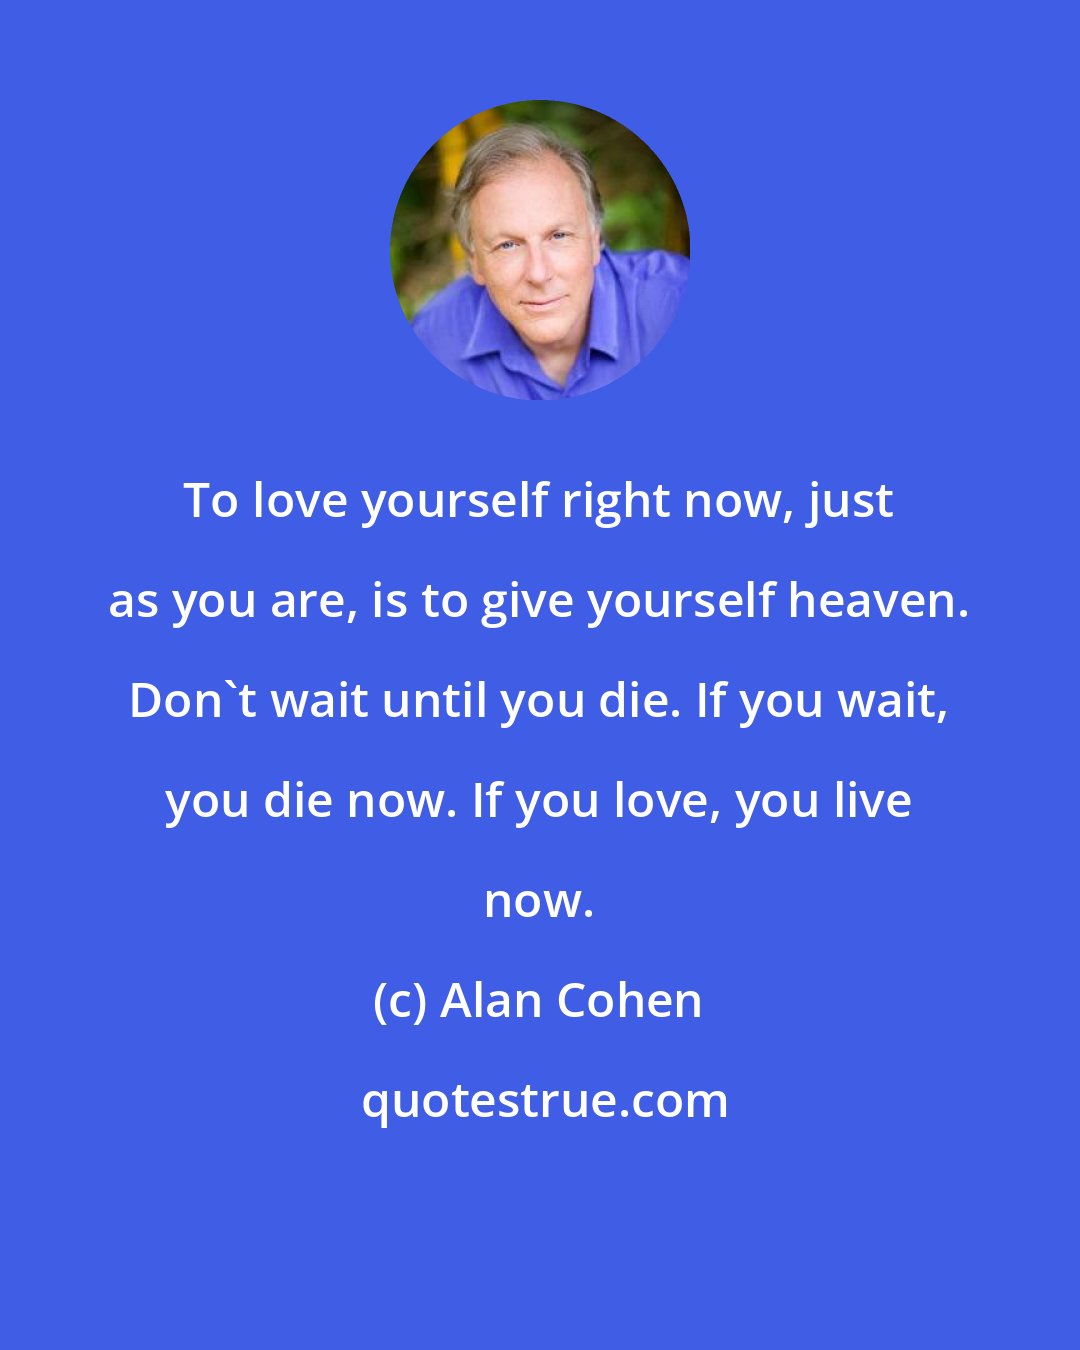 Alan Cohen: To love yourself right now, just as you are, is to give yourself heaven. Don't wait until you die. If you wait, you die now. If you love, you live now.